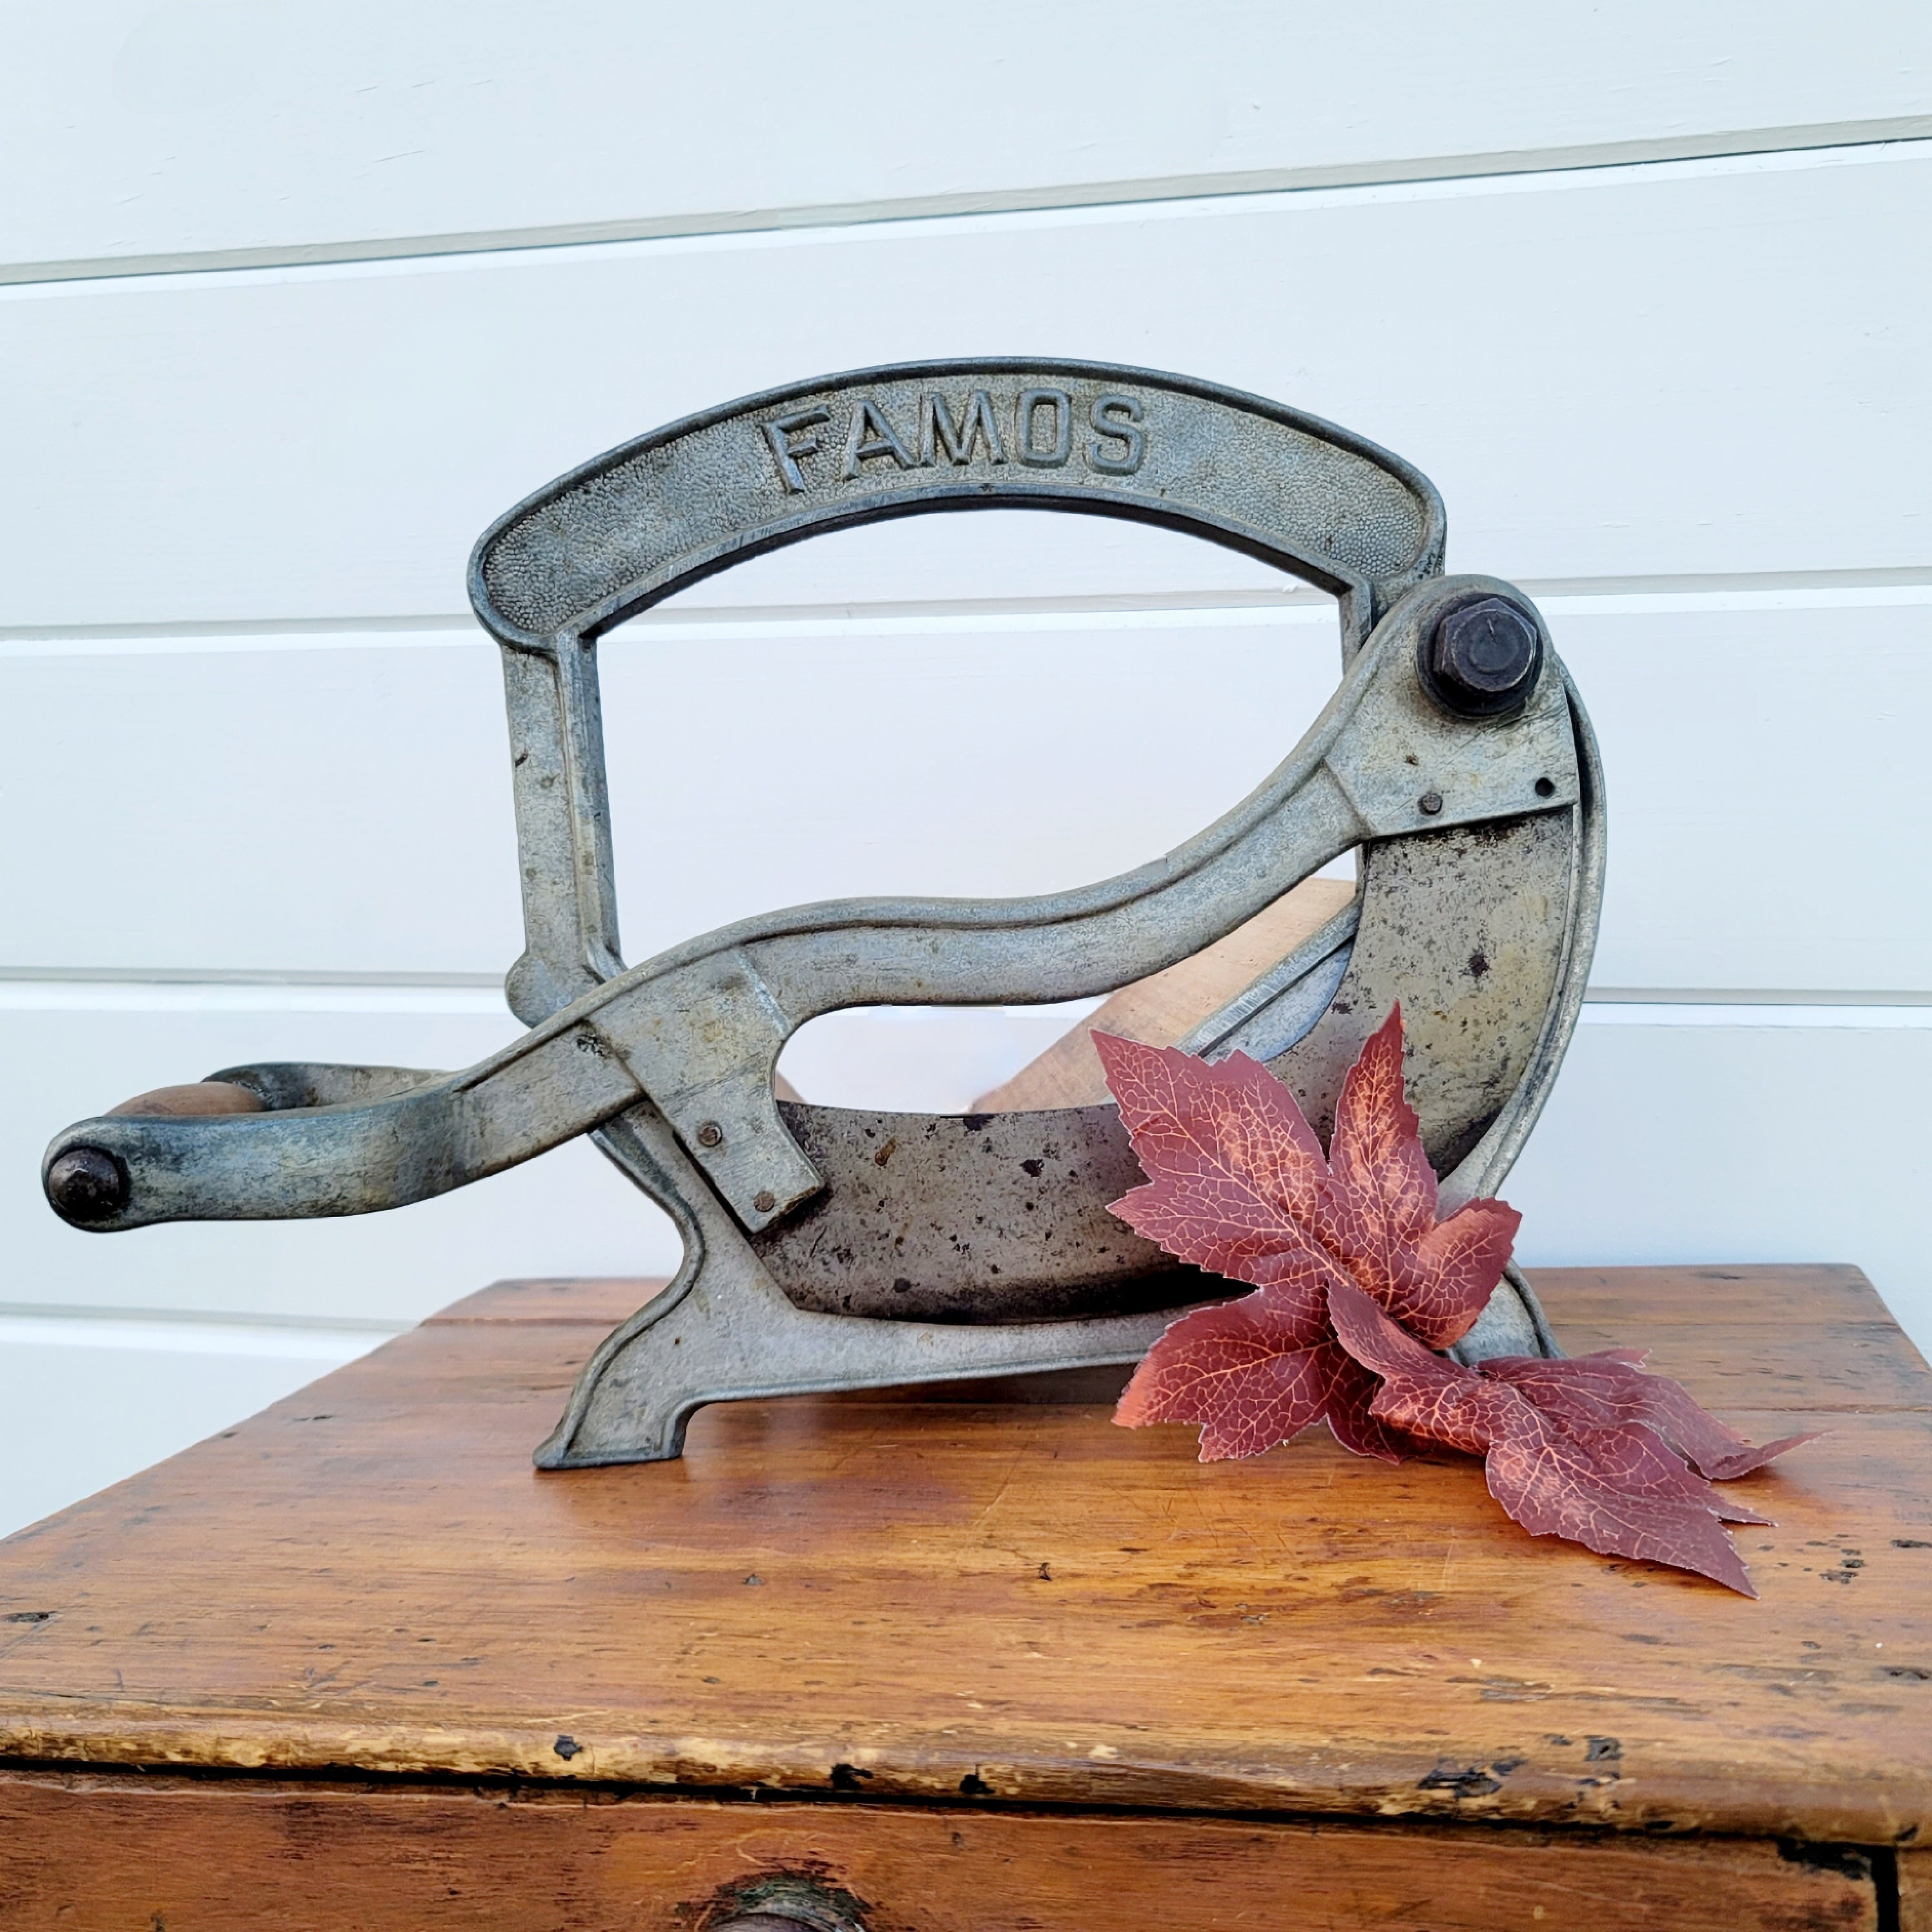 Guillotine Slicer Charcuterie Prep Tool Sausage, Cheese and Chorizo Slicer,  Mothers Day Gift Ideas 